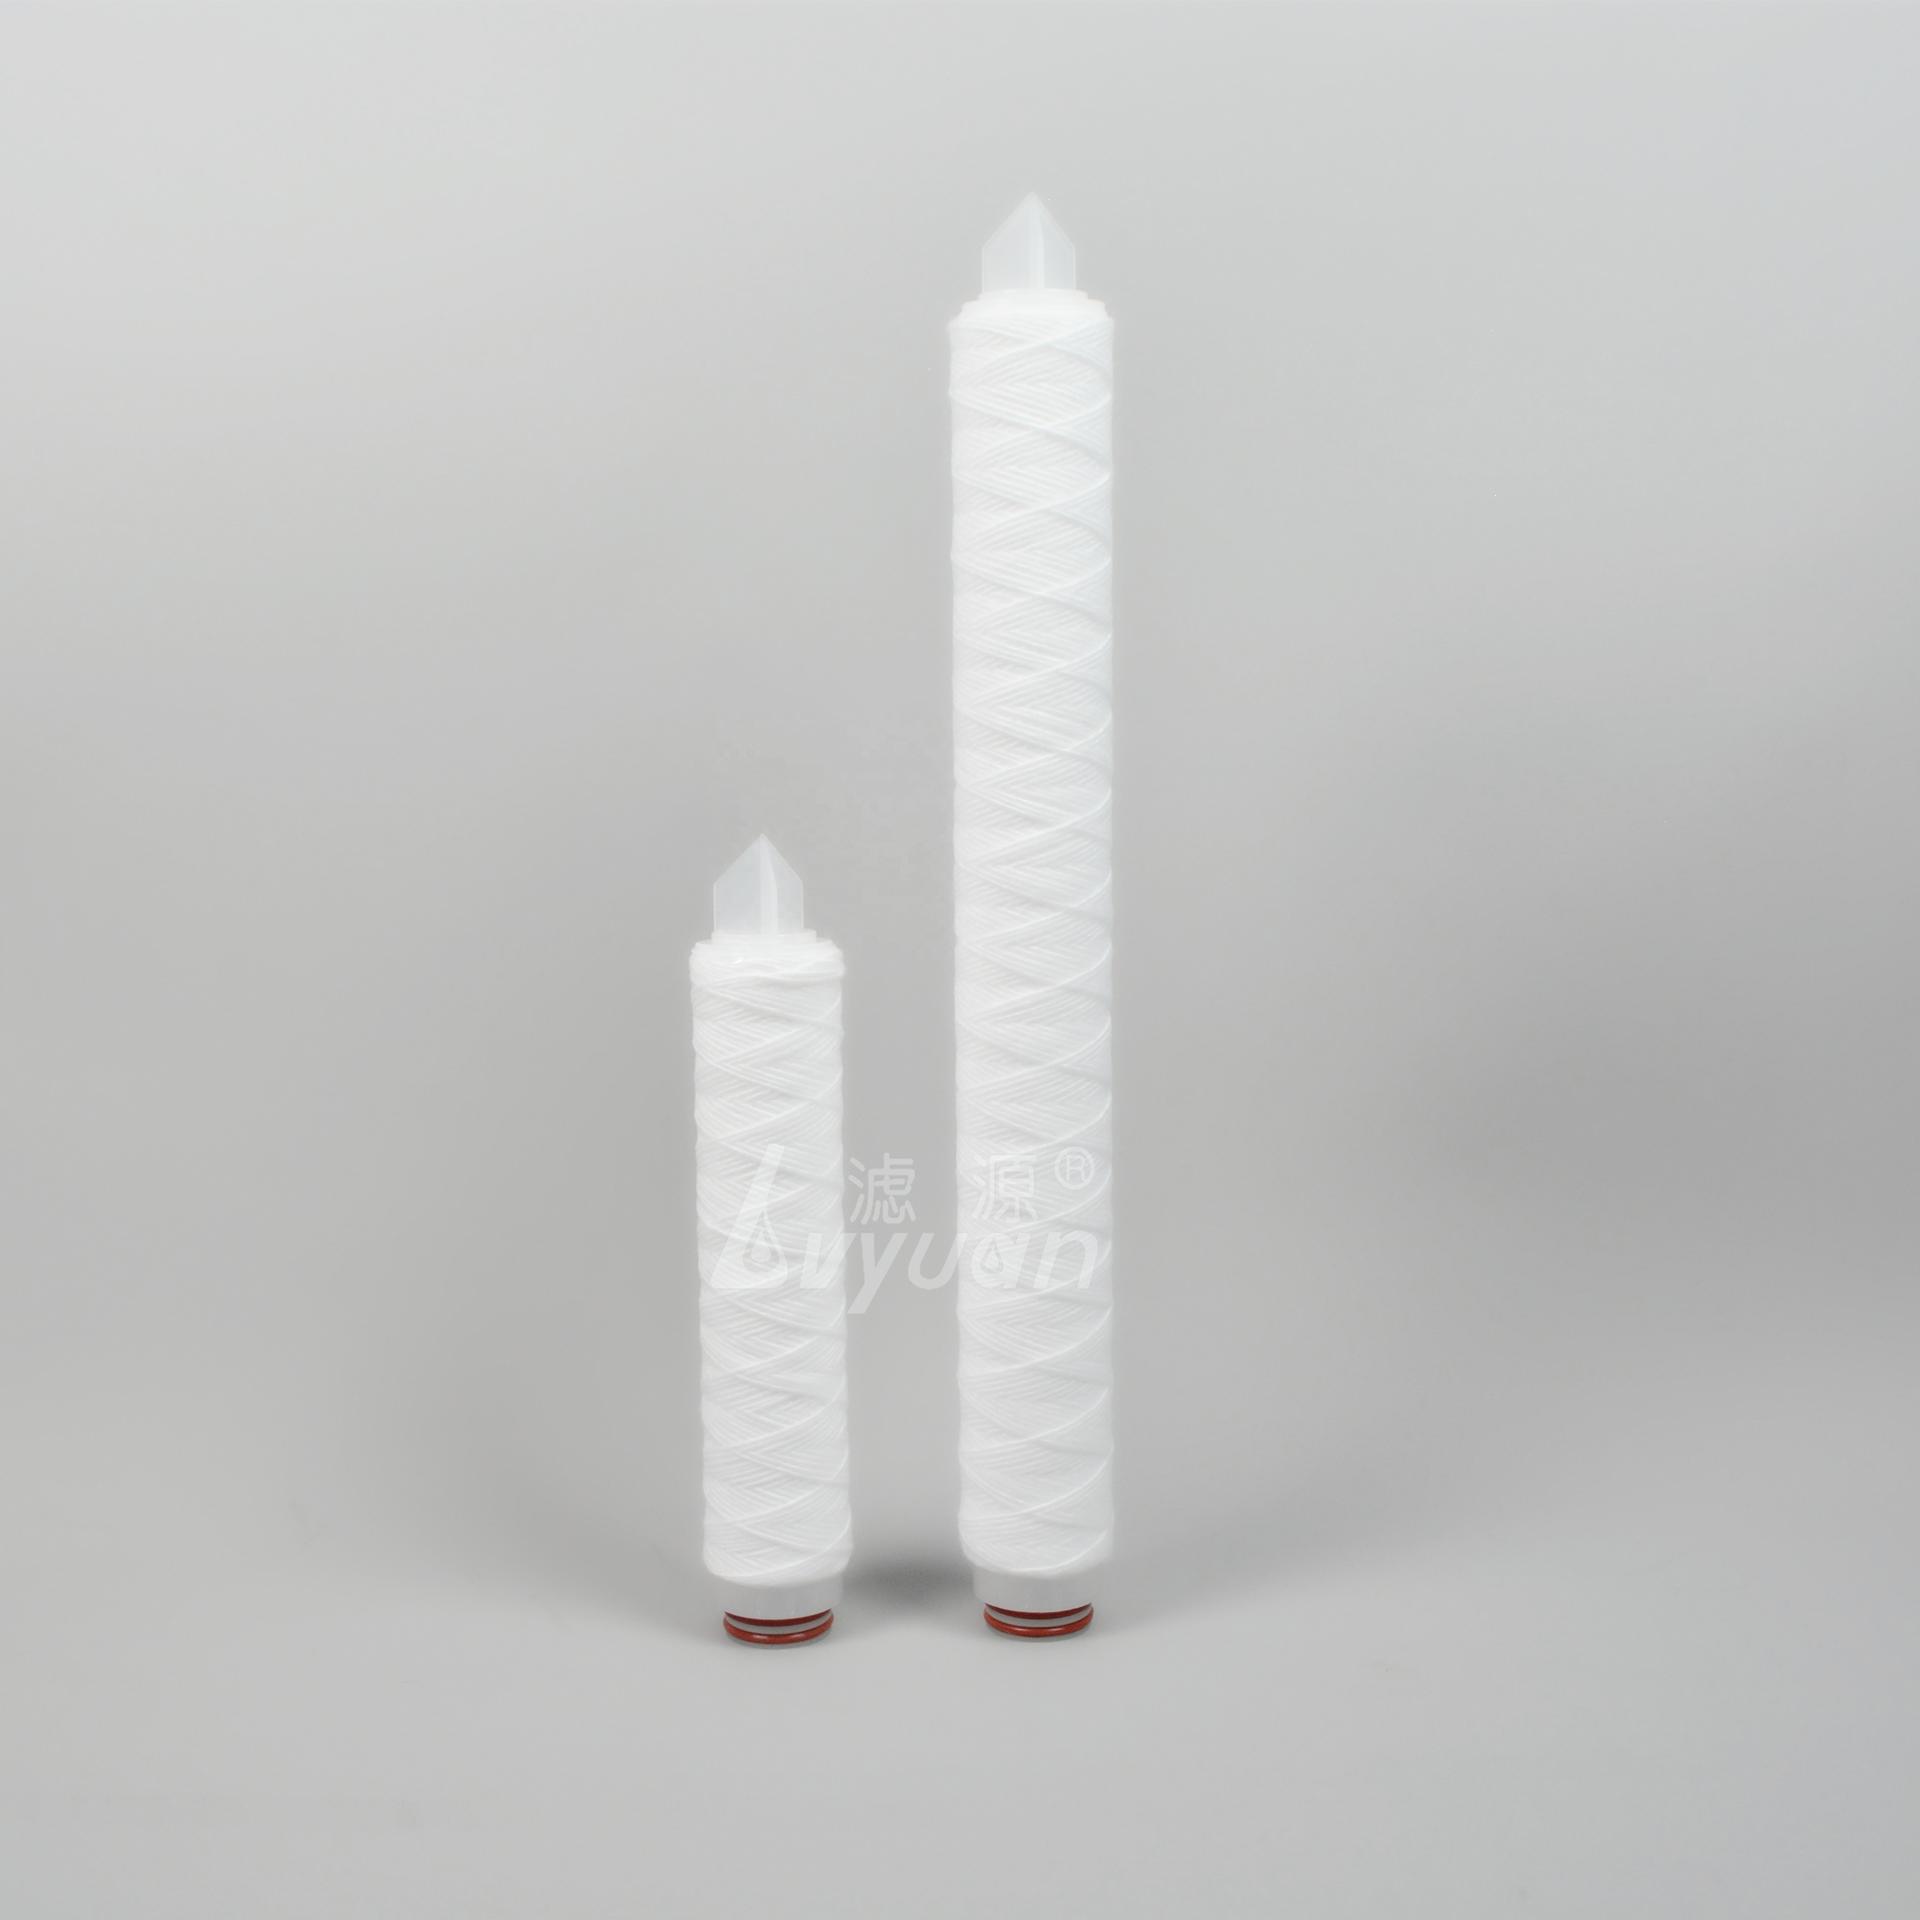 wound filter/fiberglass/cotton wound sedimentFilter Cartridge for food and beverage filtration